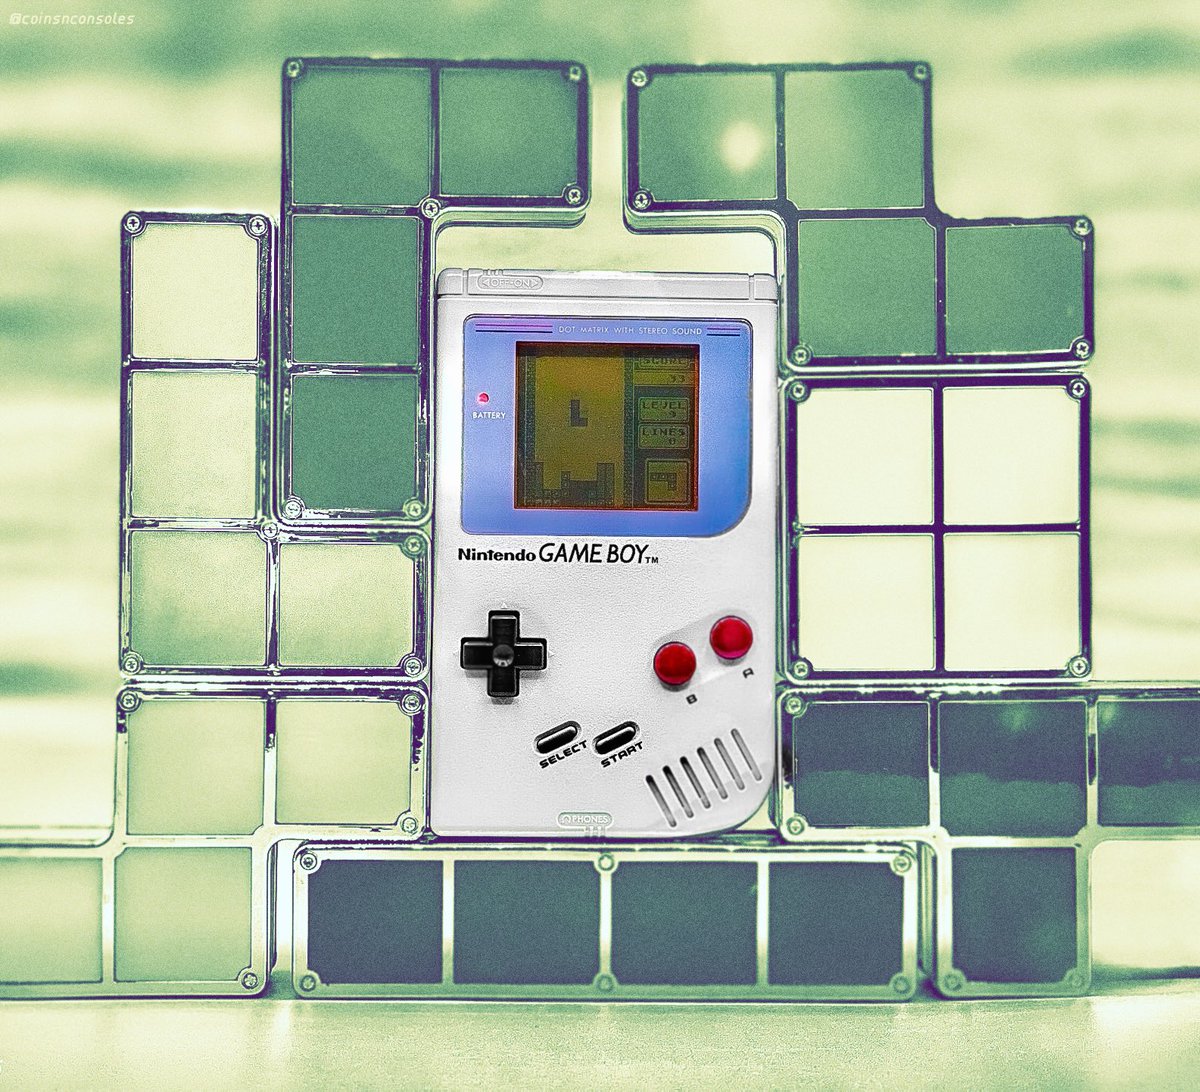 Happy 35th anniversary! 🎉 First released on April 21st, 1989 in Japan, the original DMG model Game Boy along with Tetris, ushered in a new era for handheld gaming! What are your favorite memories and games for the Game Boy? #GameBoy #Nintendo #ゲームボイ